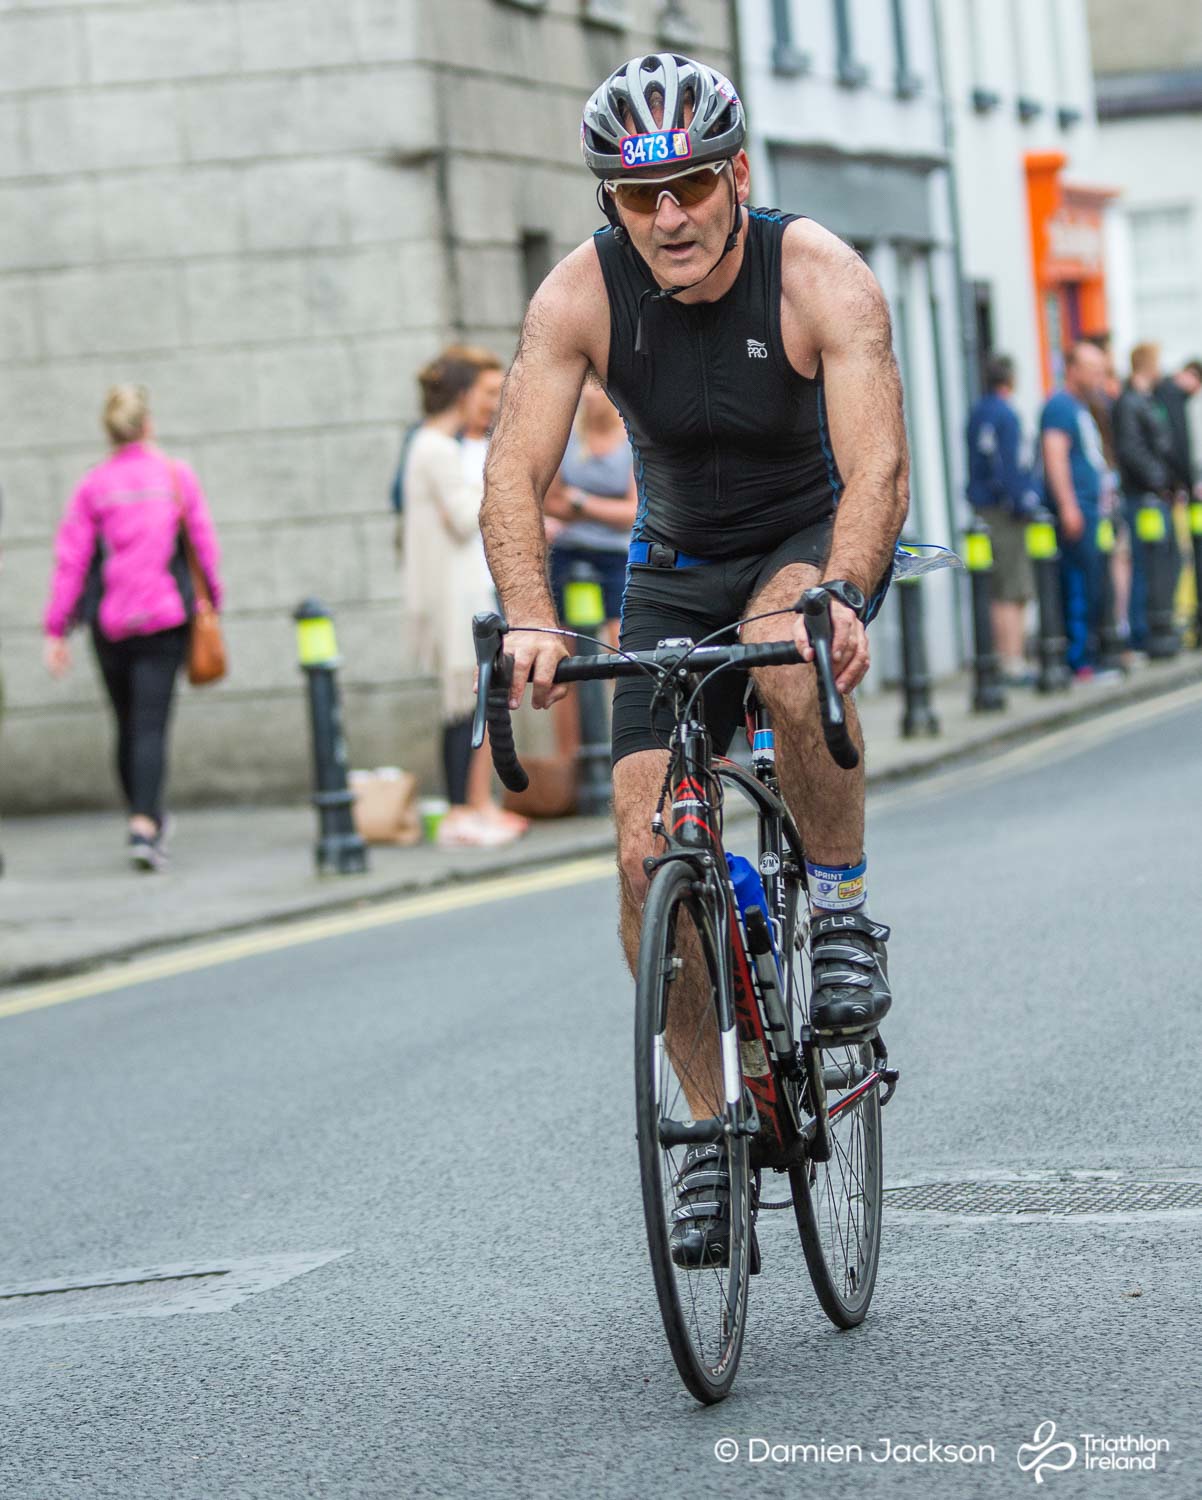 Athy_2018 (169 of 526) - TriAthy - XII Edition - 2nd June 2018